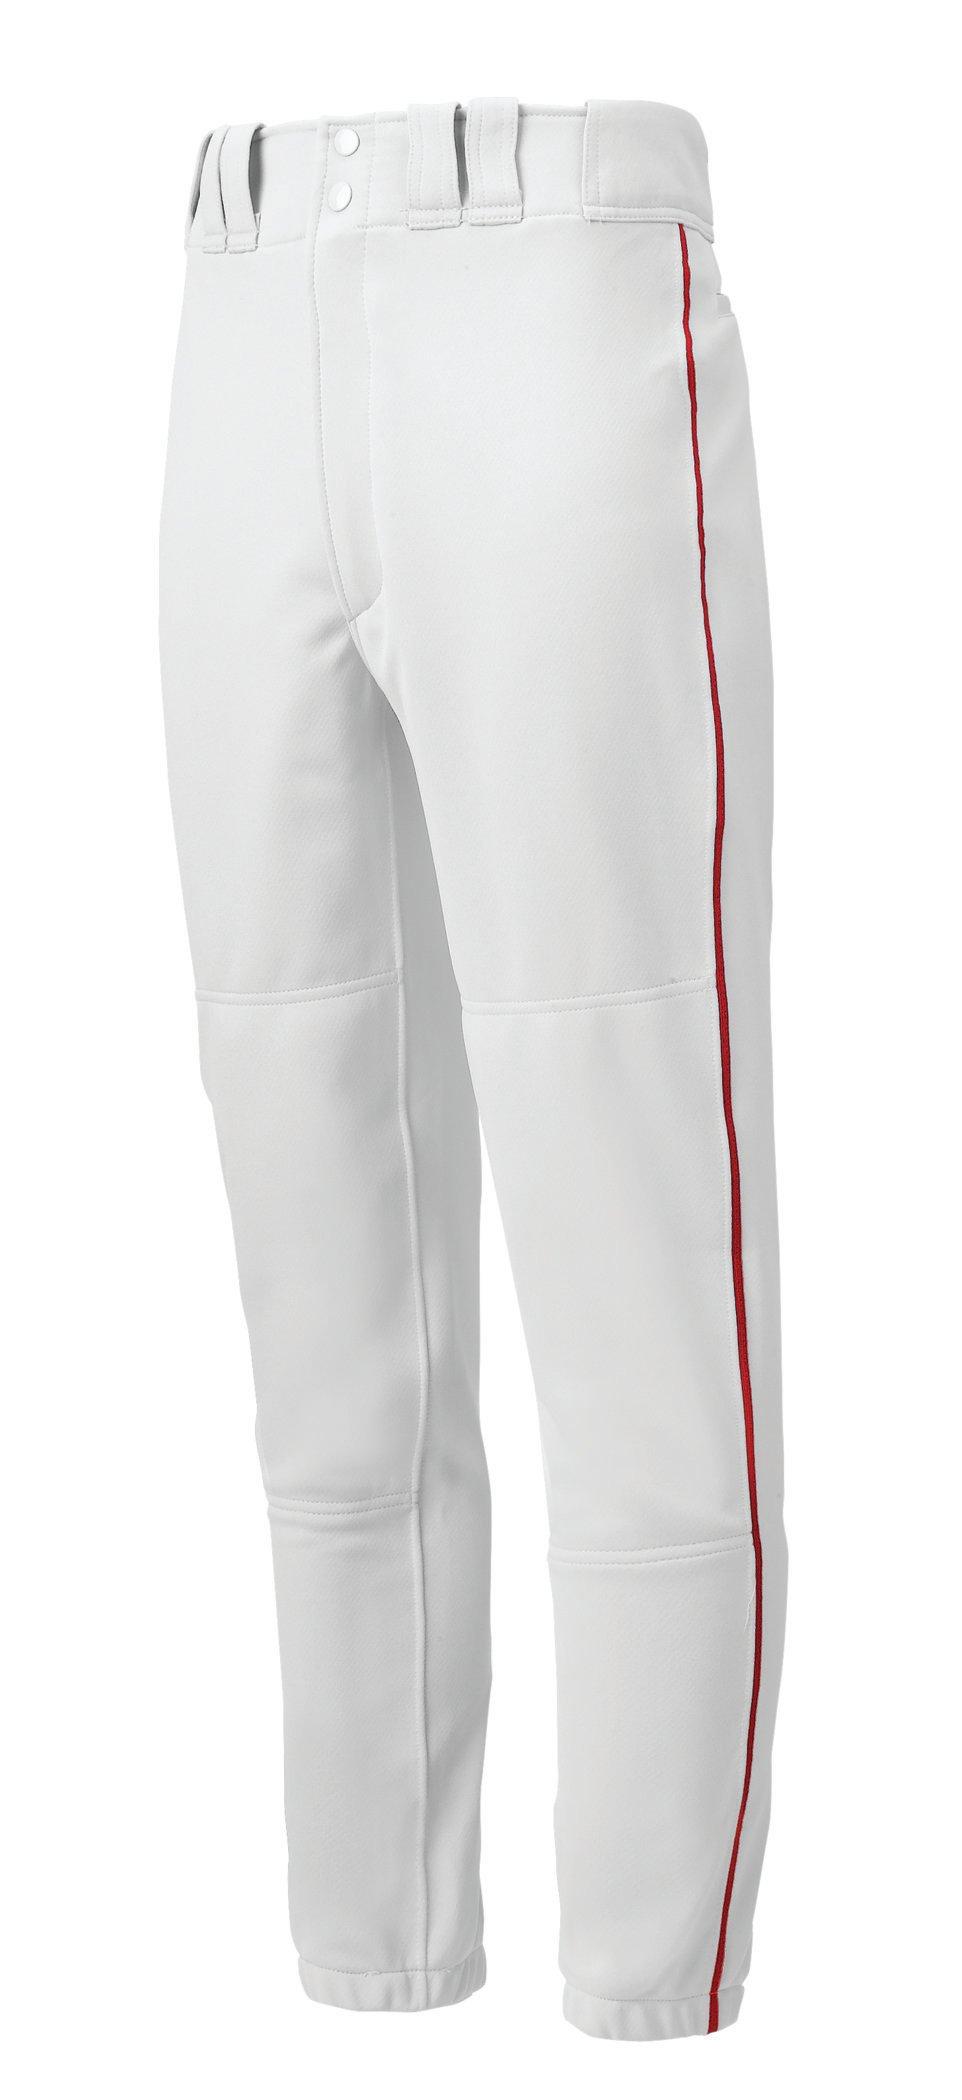 Details about   MIZUNO Baseball pants practice game JD9F67 from Japan　Y/N 